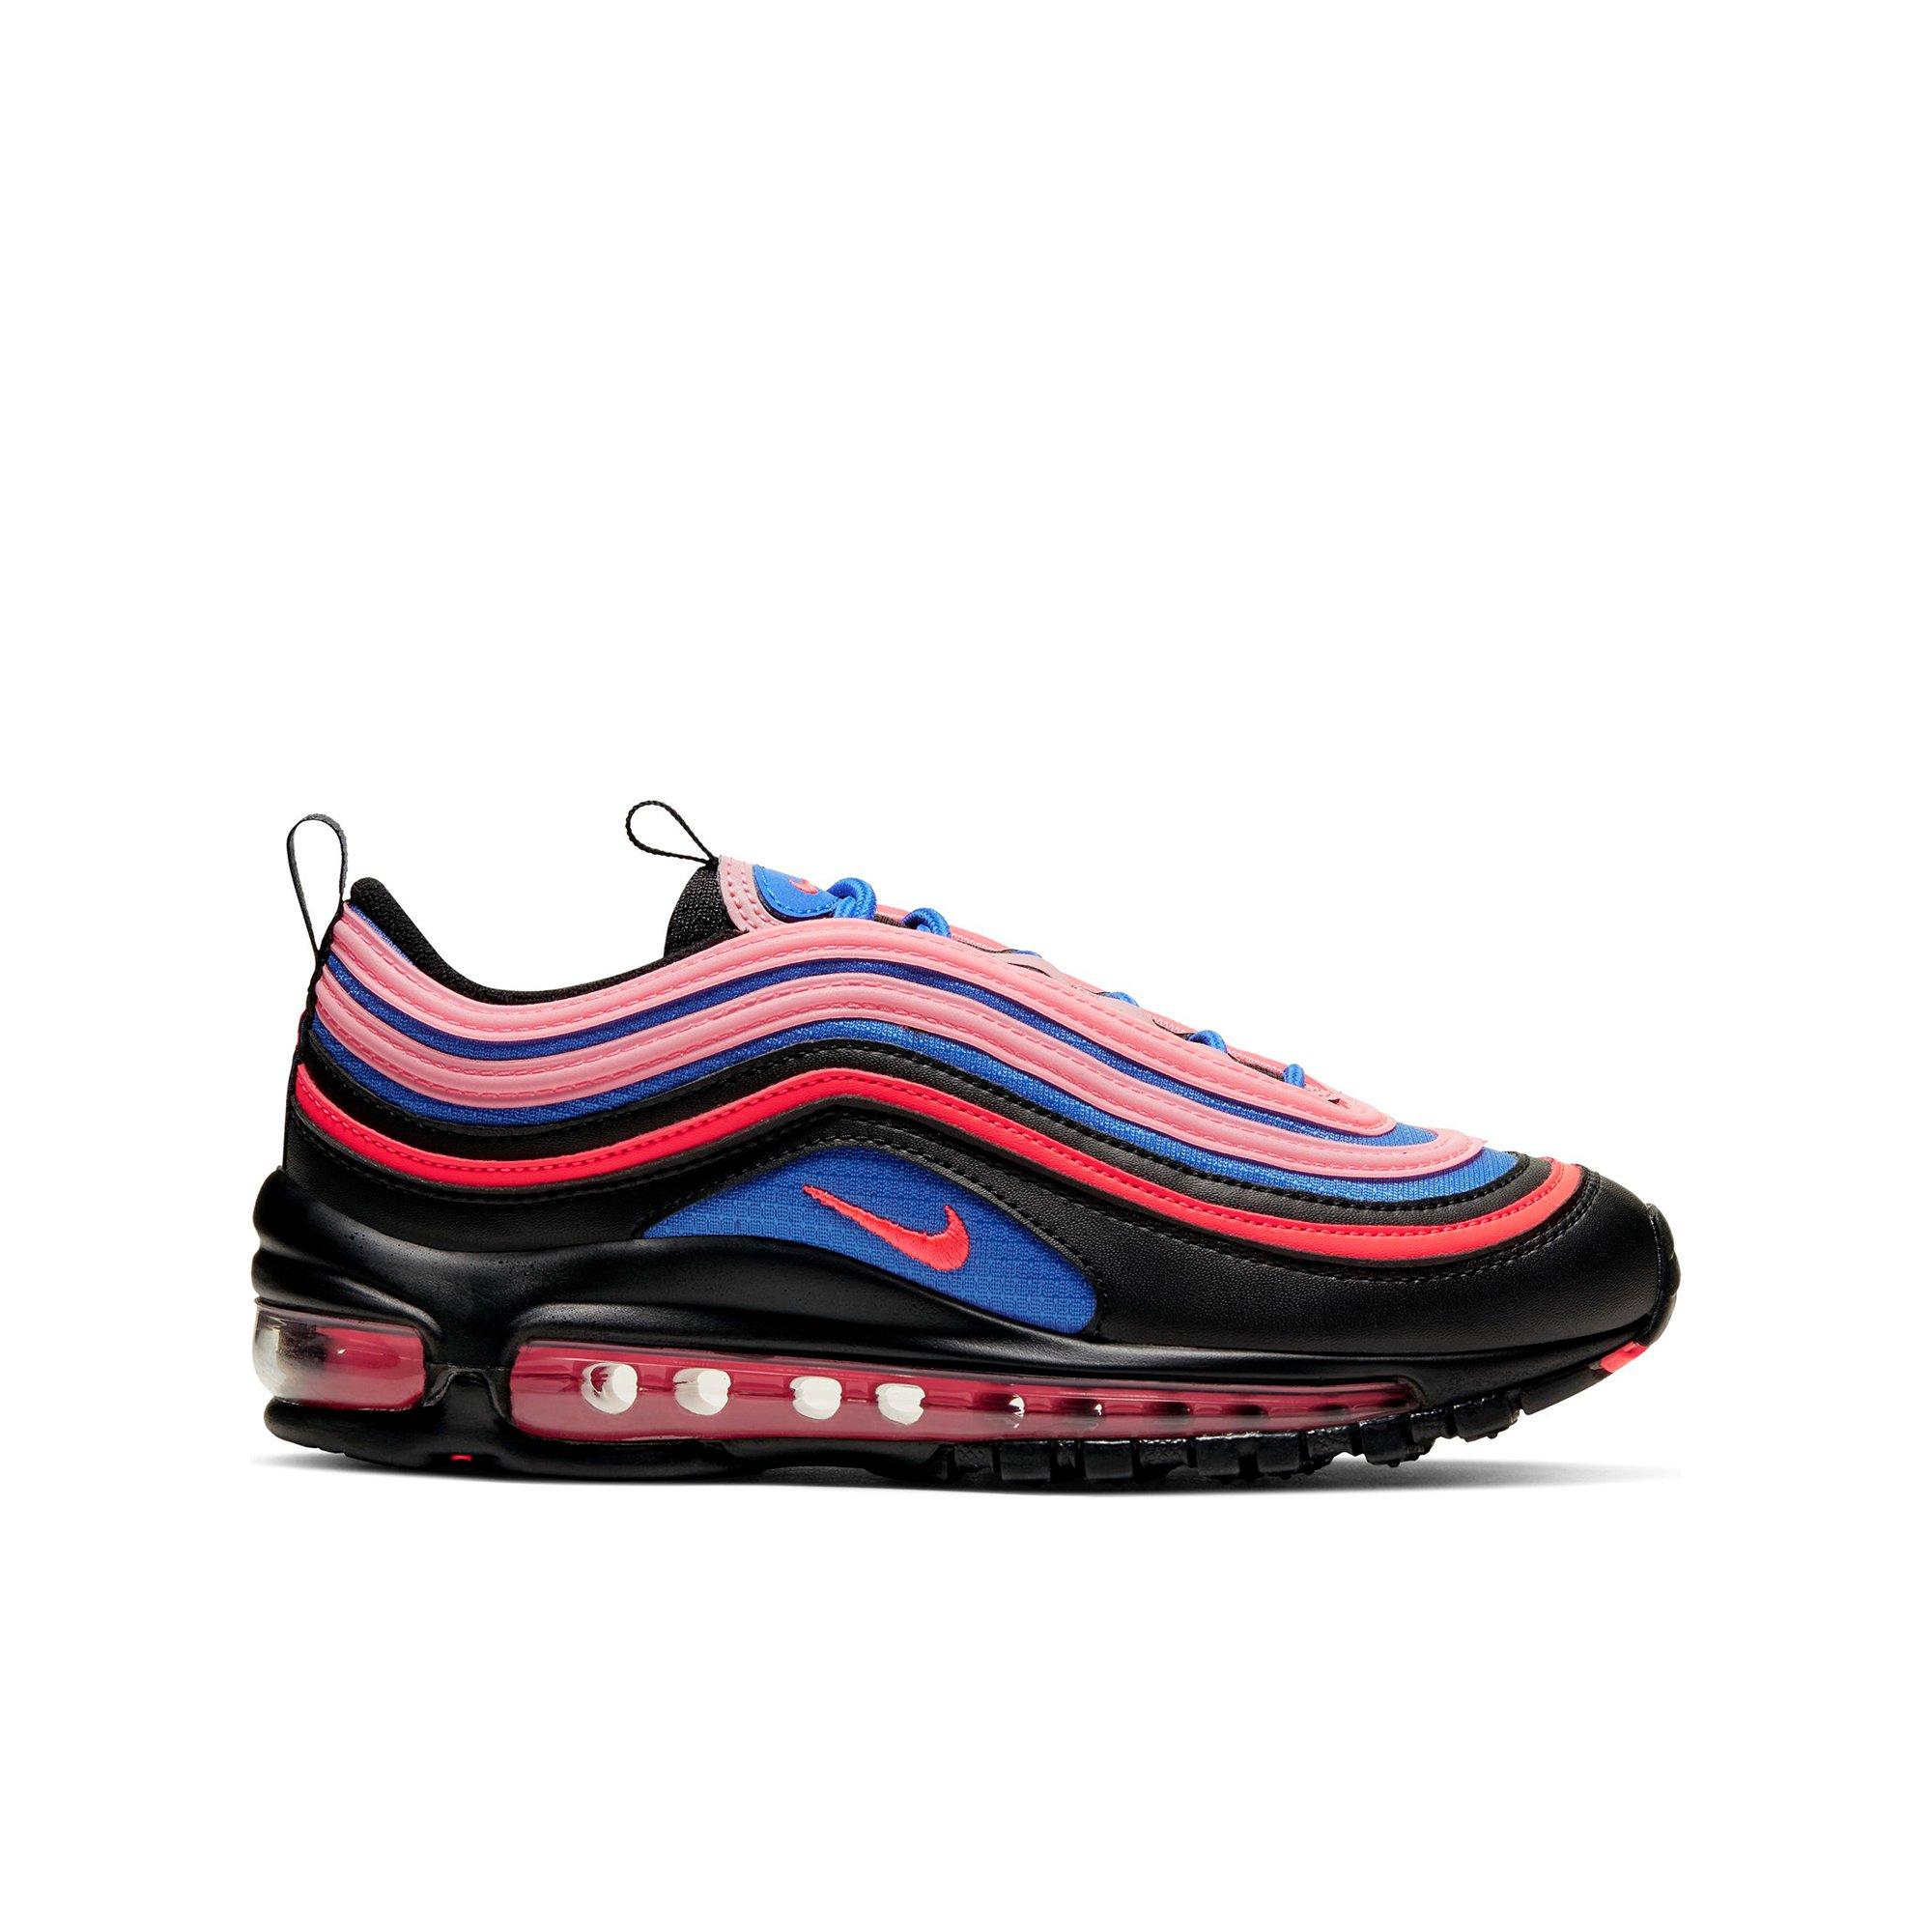 air max 97s on sale